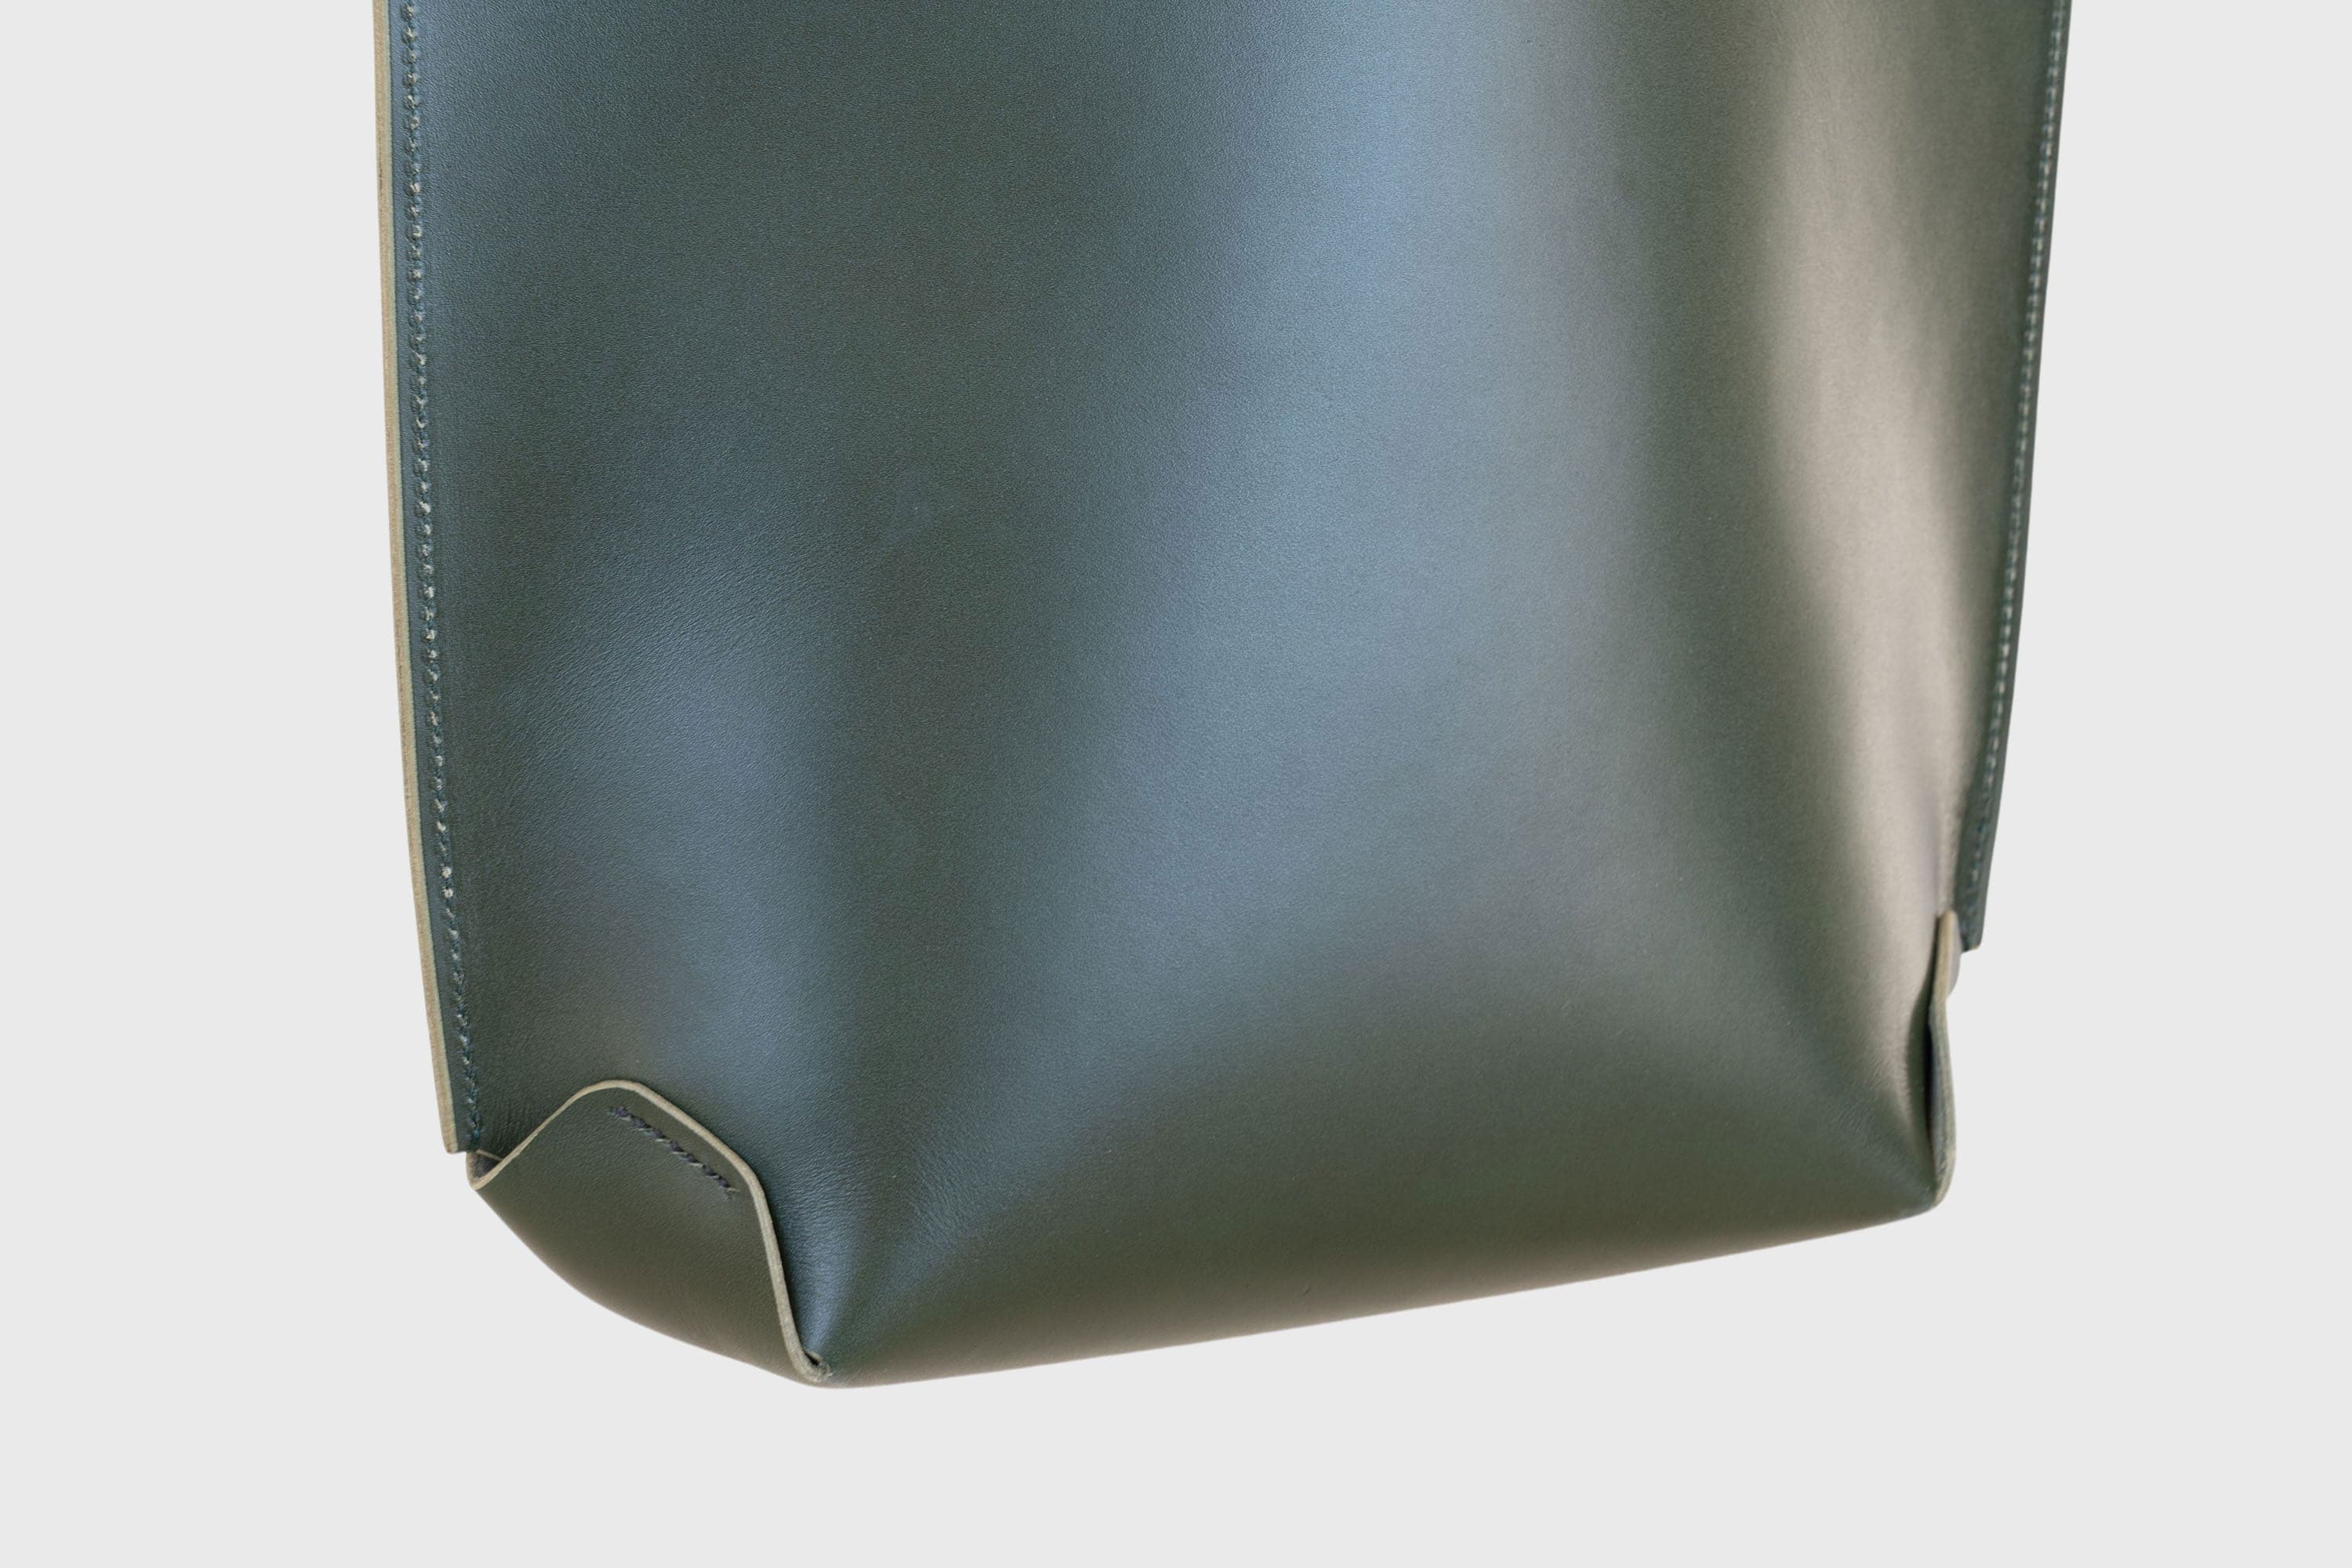 Tote Bag Olive Green Leather Vegetable Tanned High Quality and Design By Manuel Dreesmann Atelier Madre Barcelona Spain